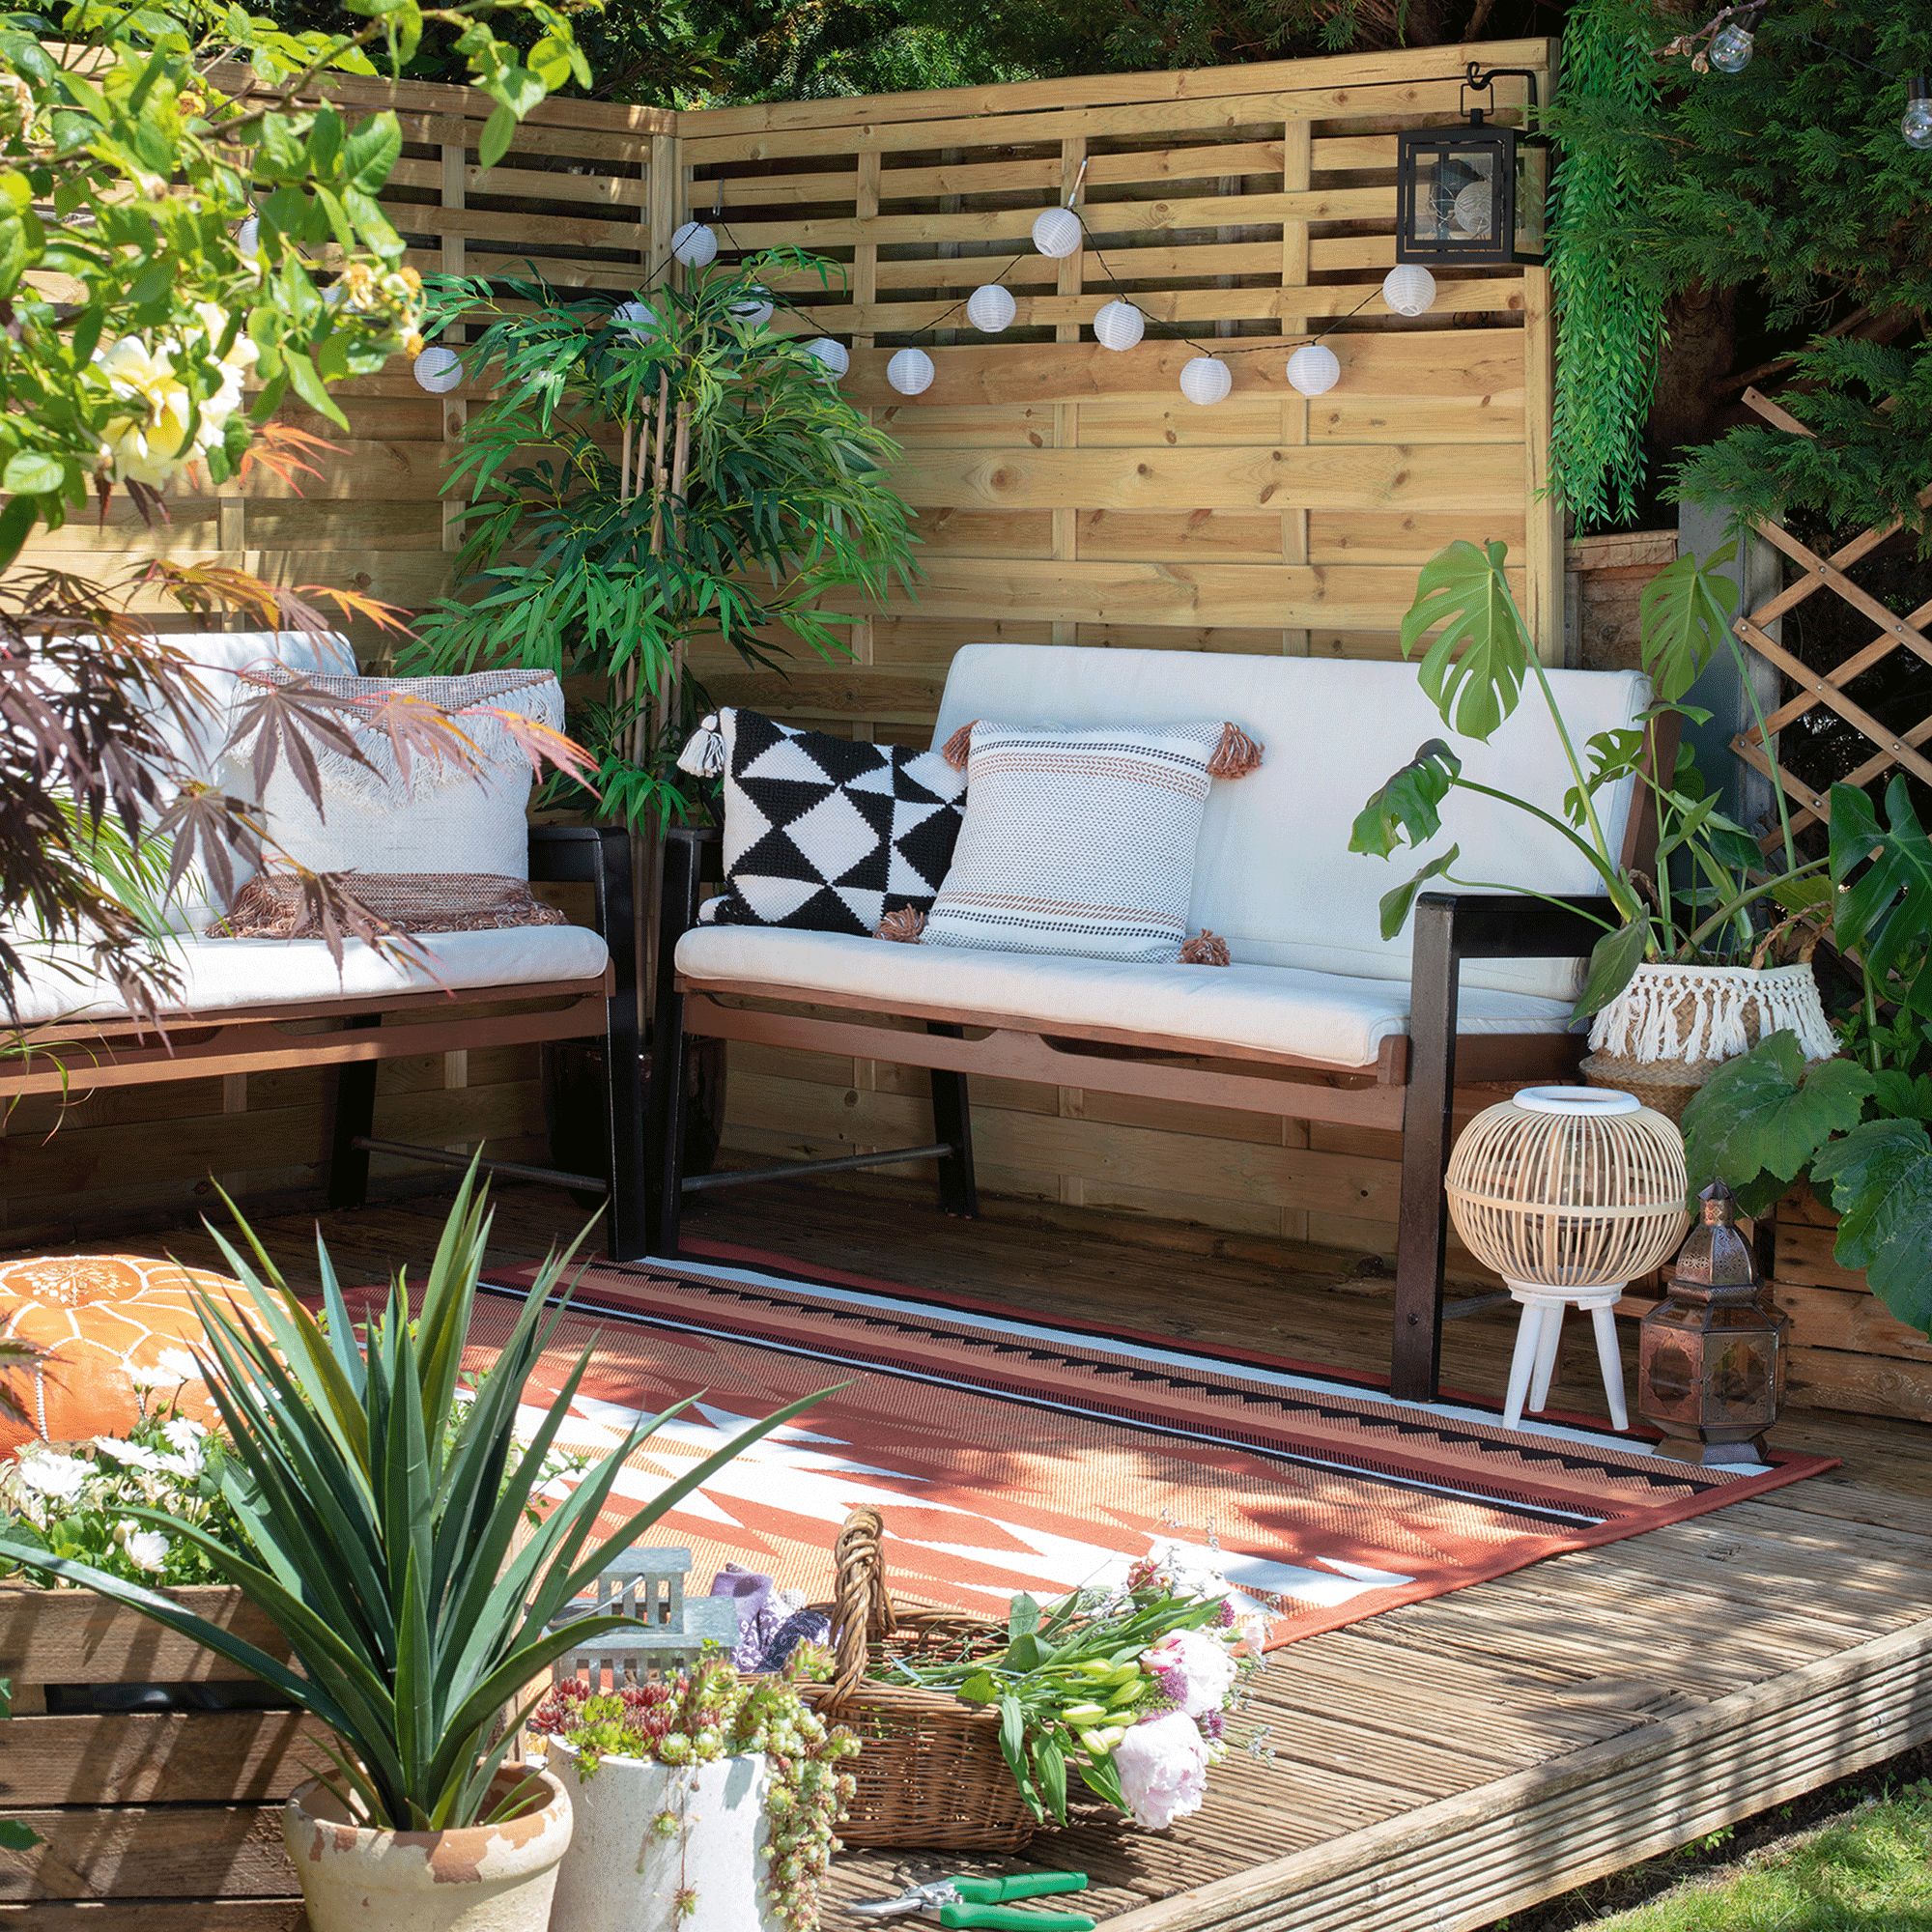 Decked seating area with cushions